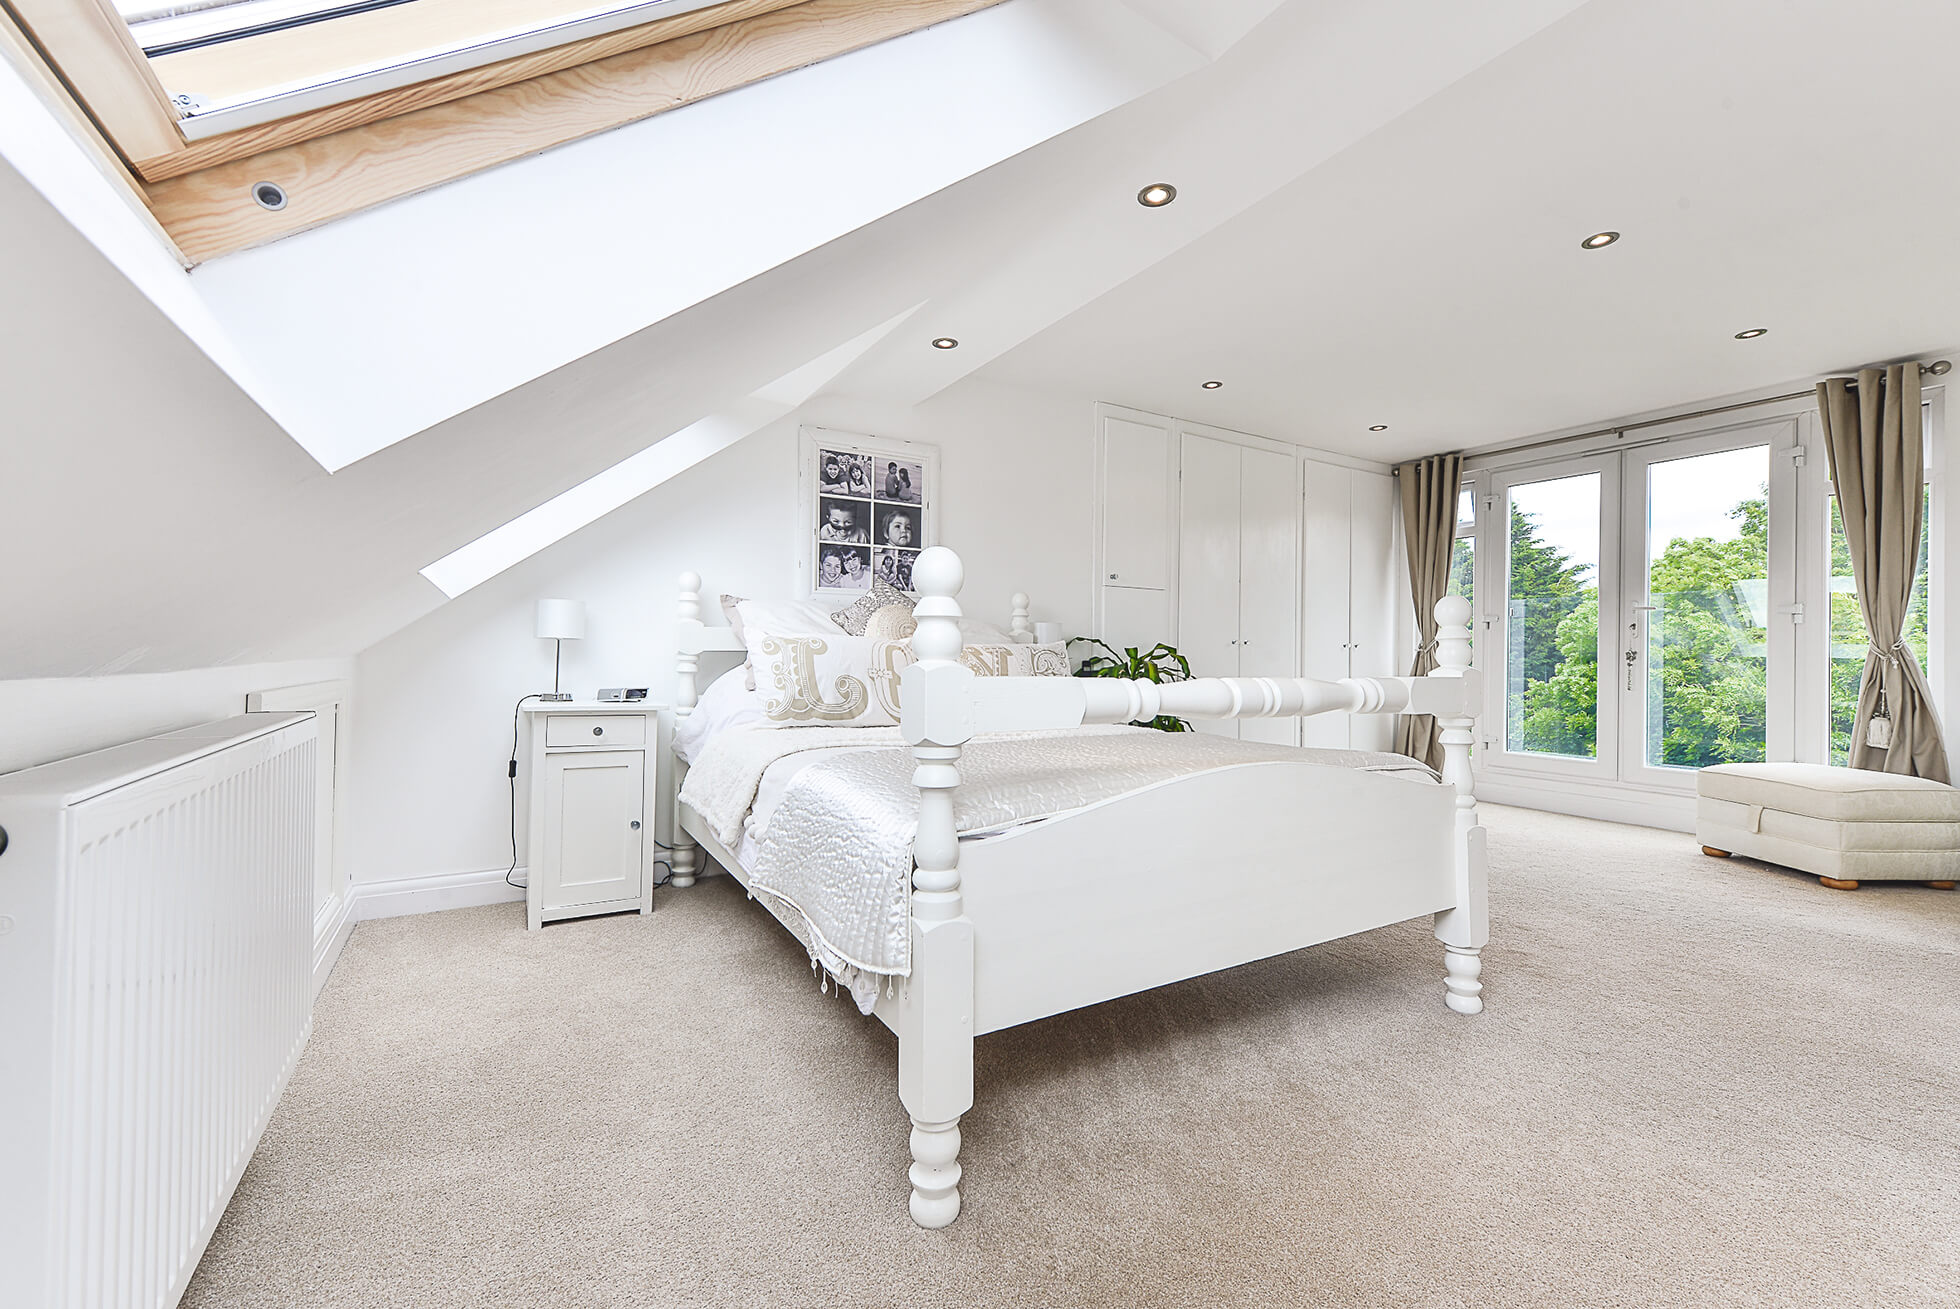 Do you have a question about converting your Loft in Waltham Cross? Here are the most popular questions asked by our clients.